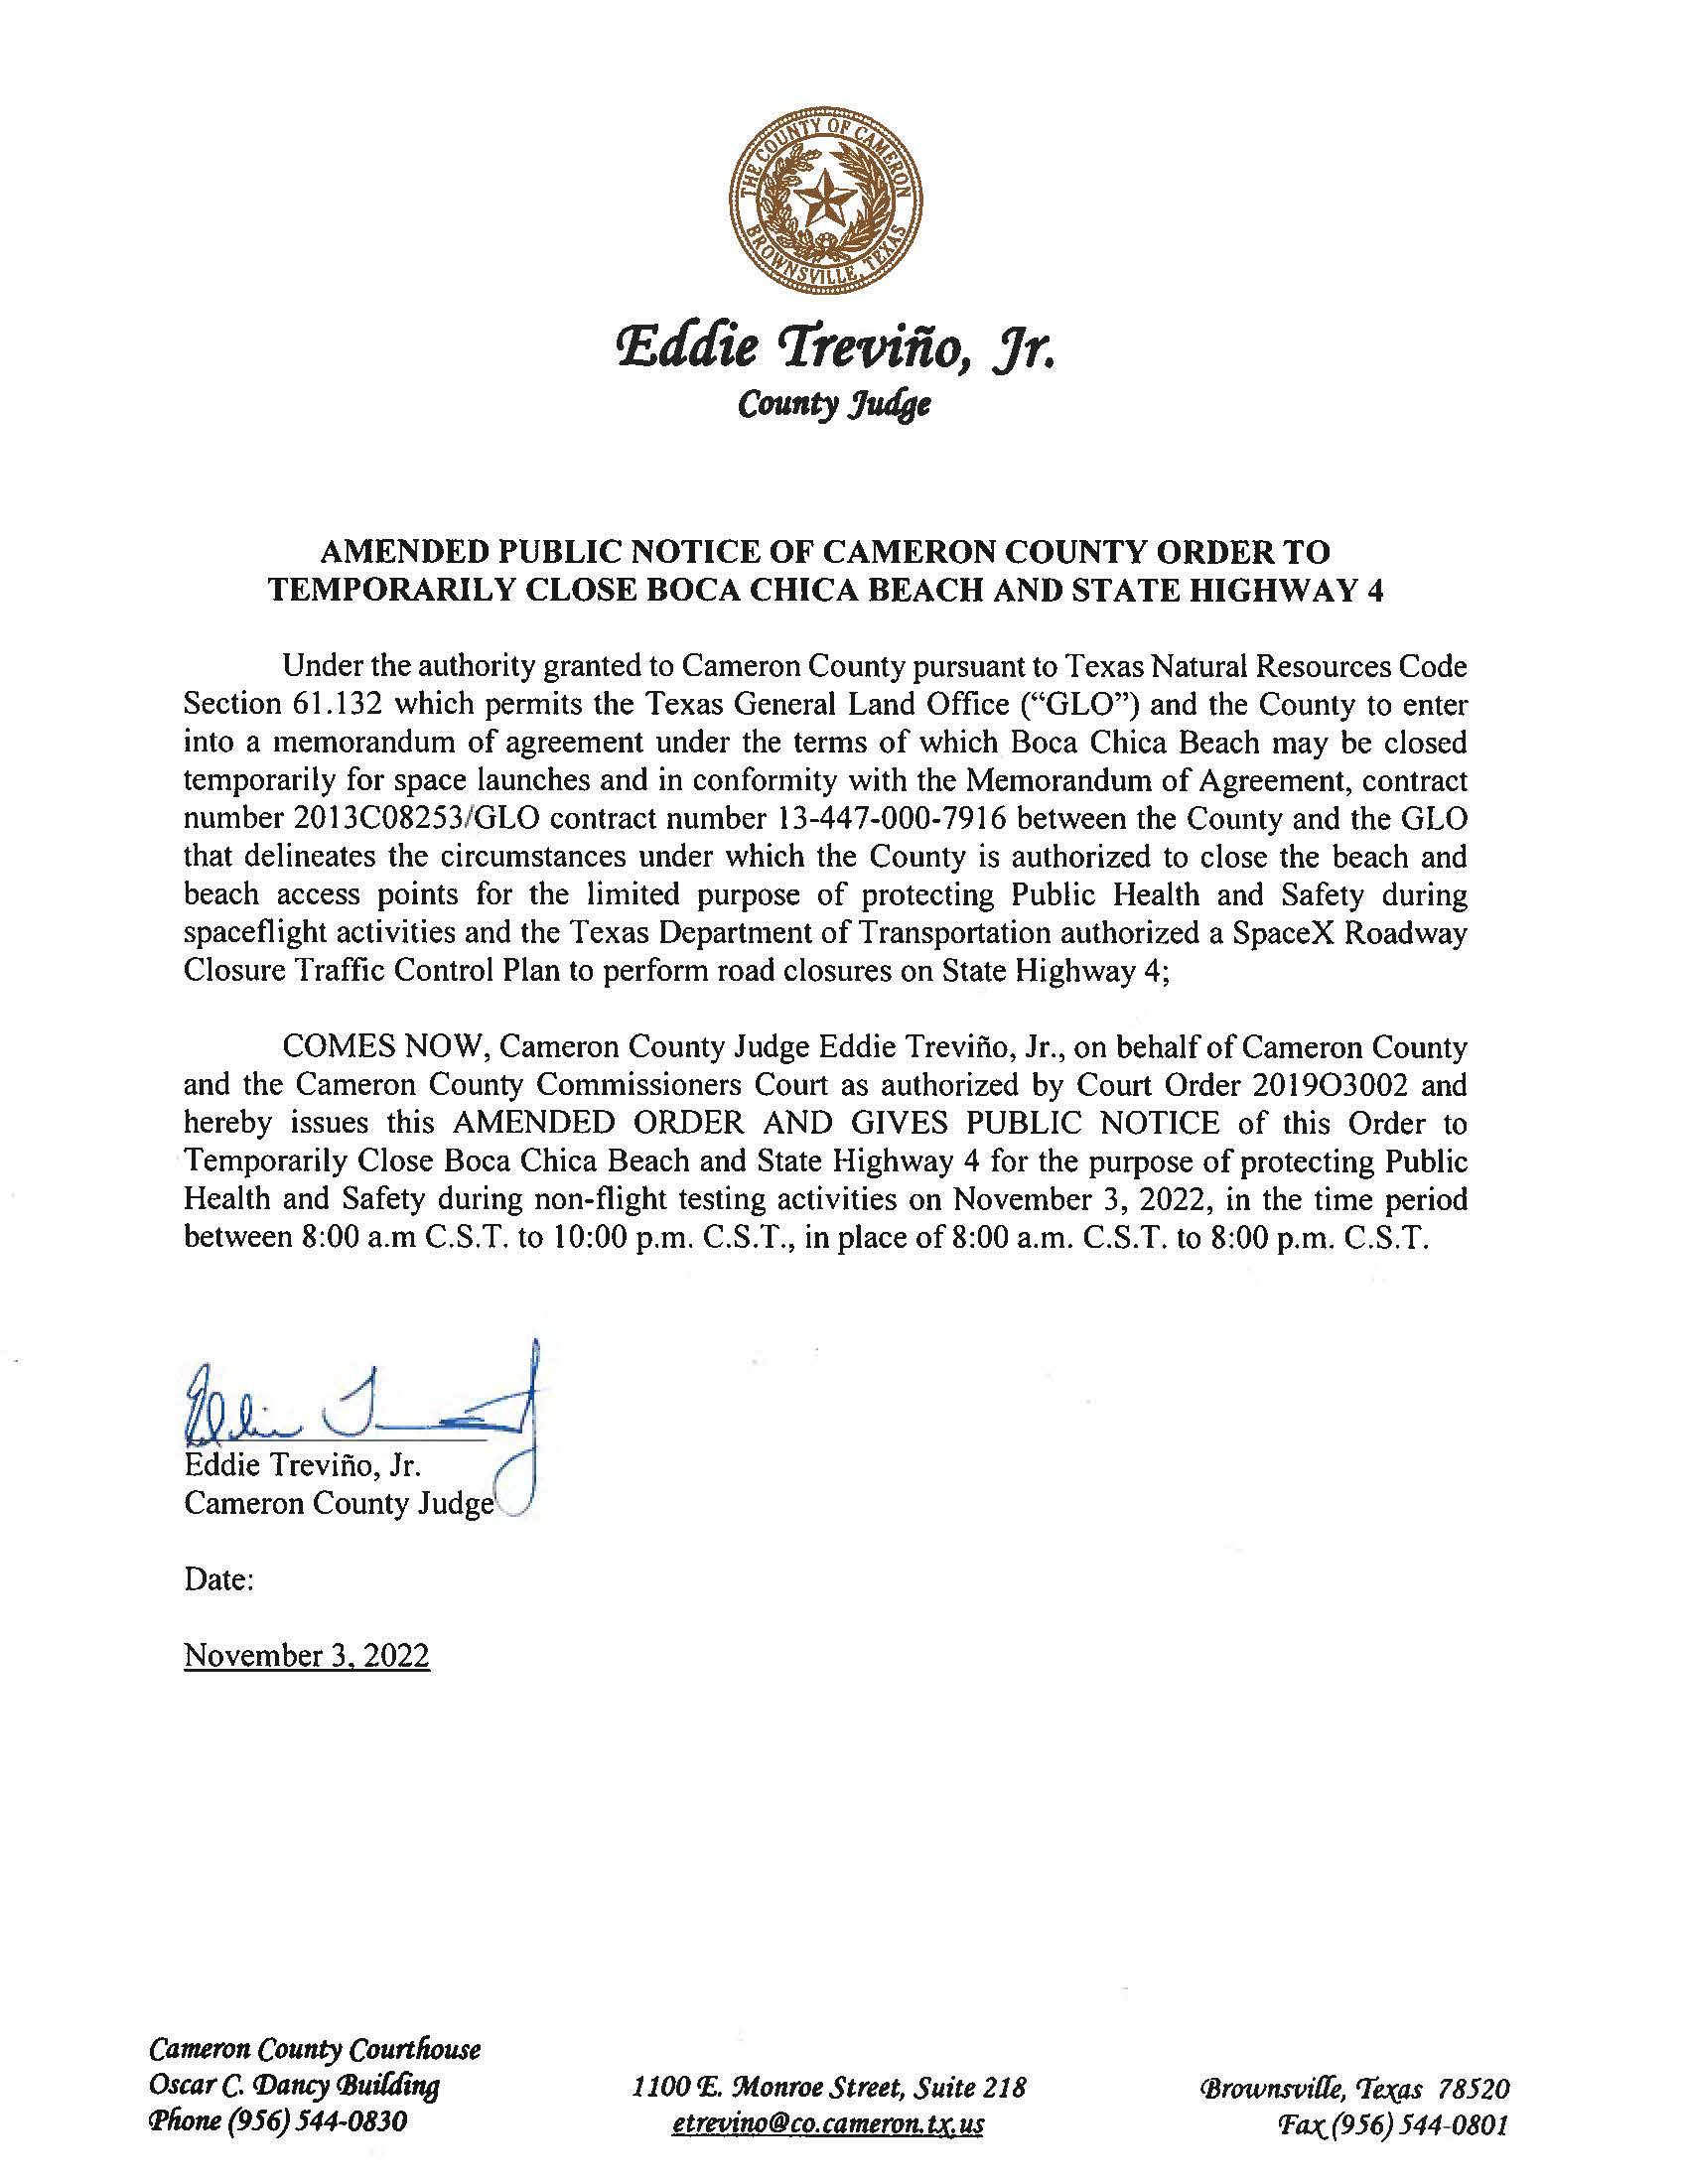 AMENDMENT PUBLIC NOTICE OF CAMERON COUNTY ORDER TO TEMP. BEACH CLOSURE AND HWY.11.03.2022